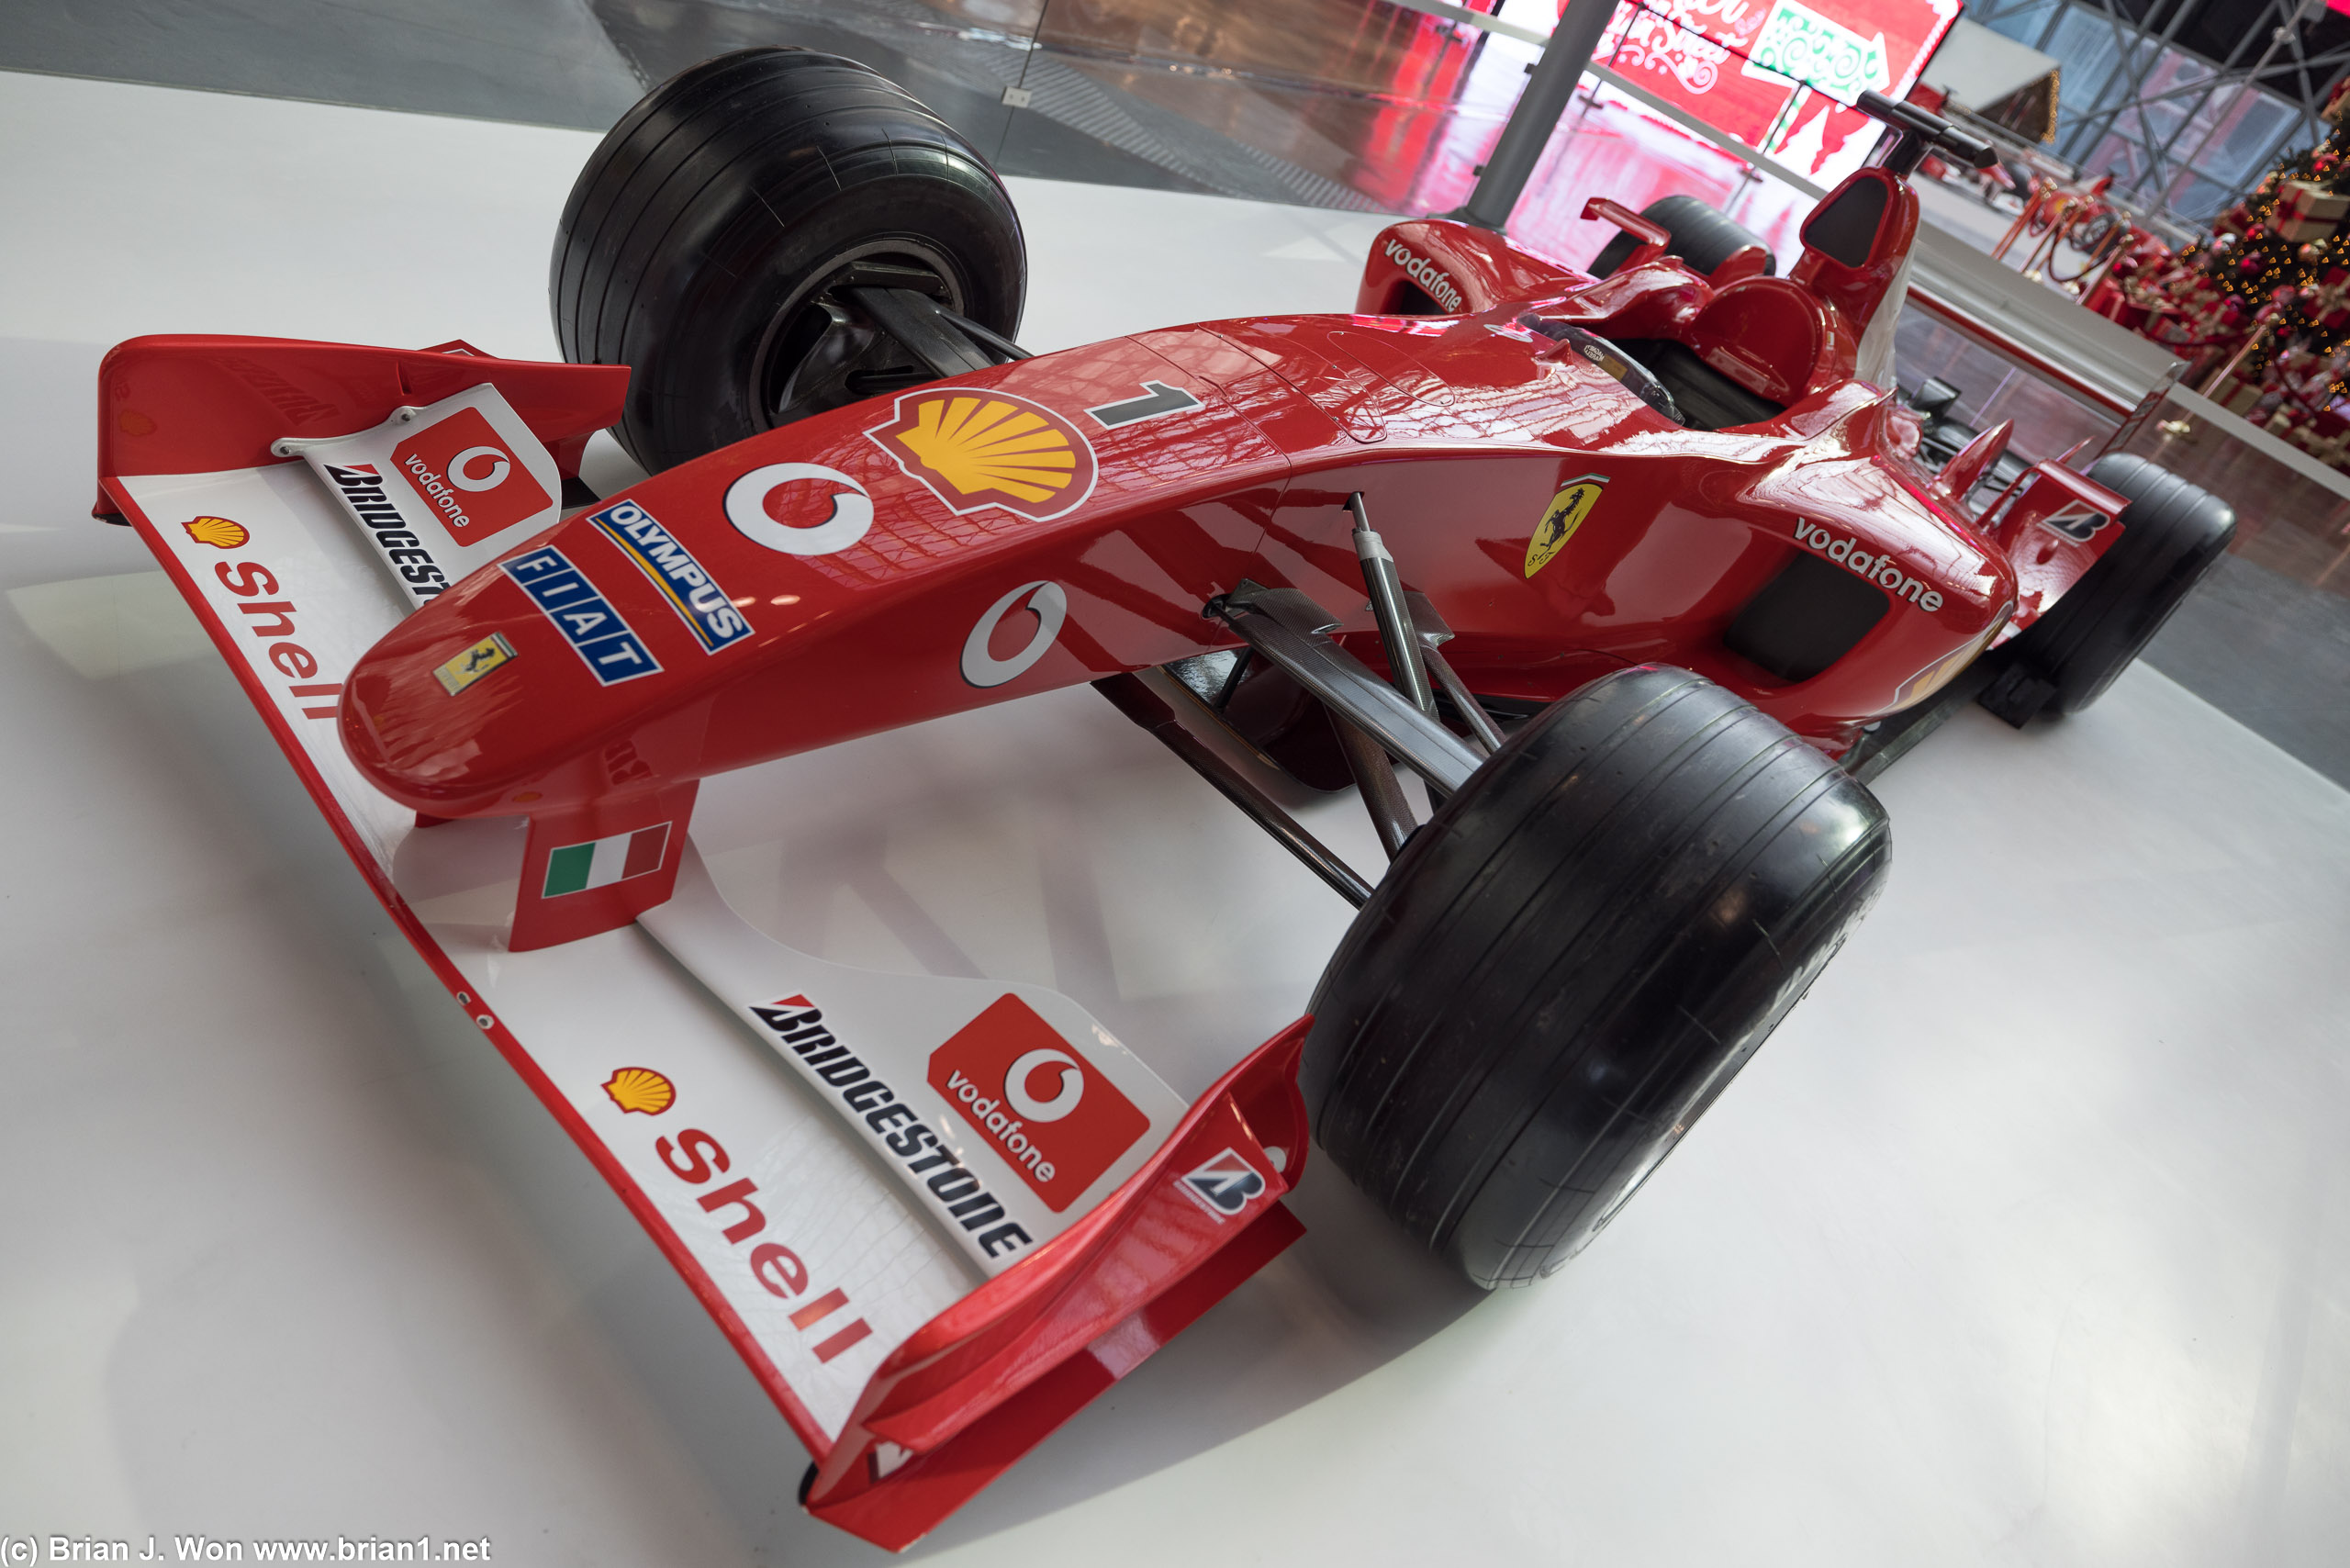 Ferrari F2003-GA (?) is the first race car that greets you.